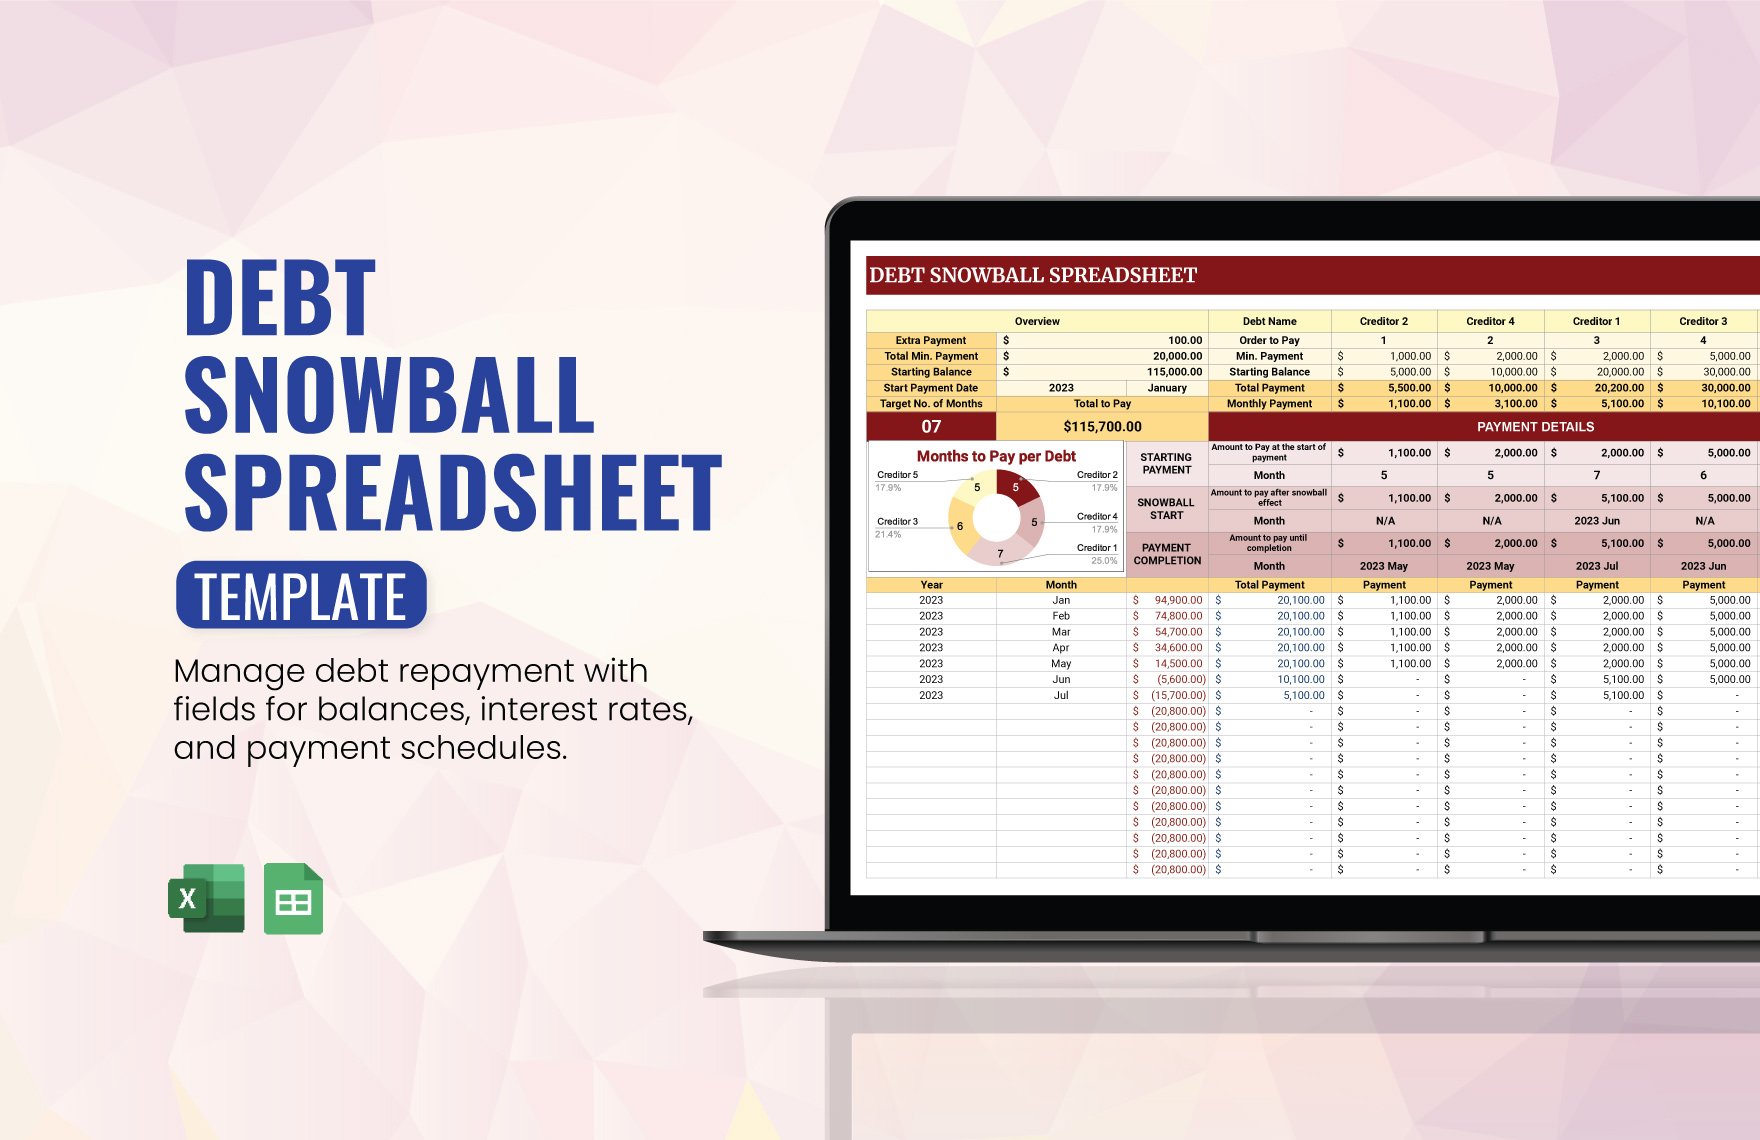 Debt Snowball Spreadsheet Template in Excel, Google Sheets